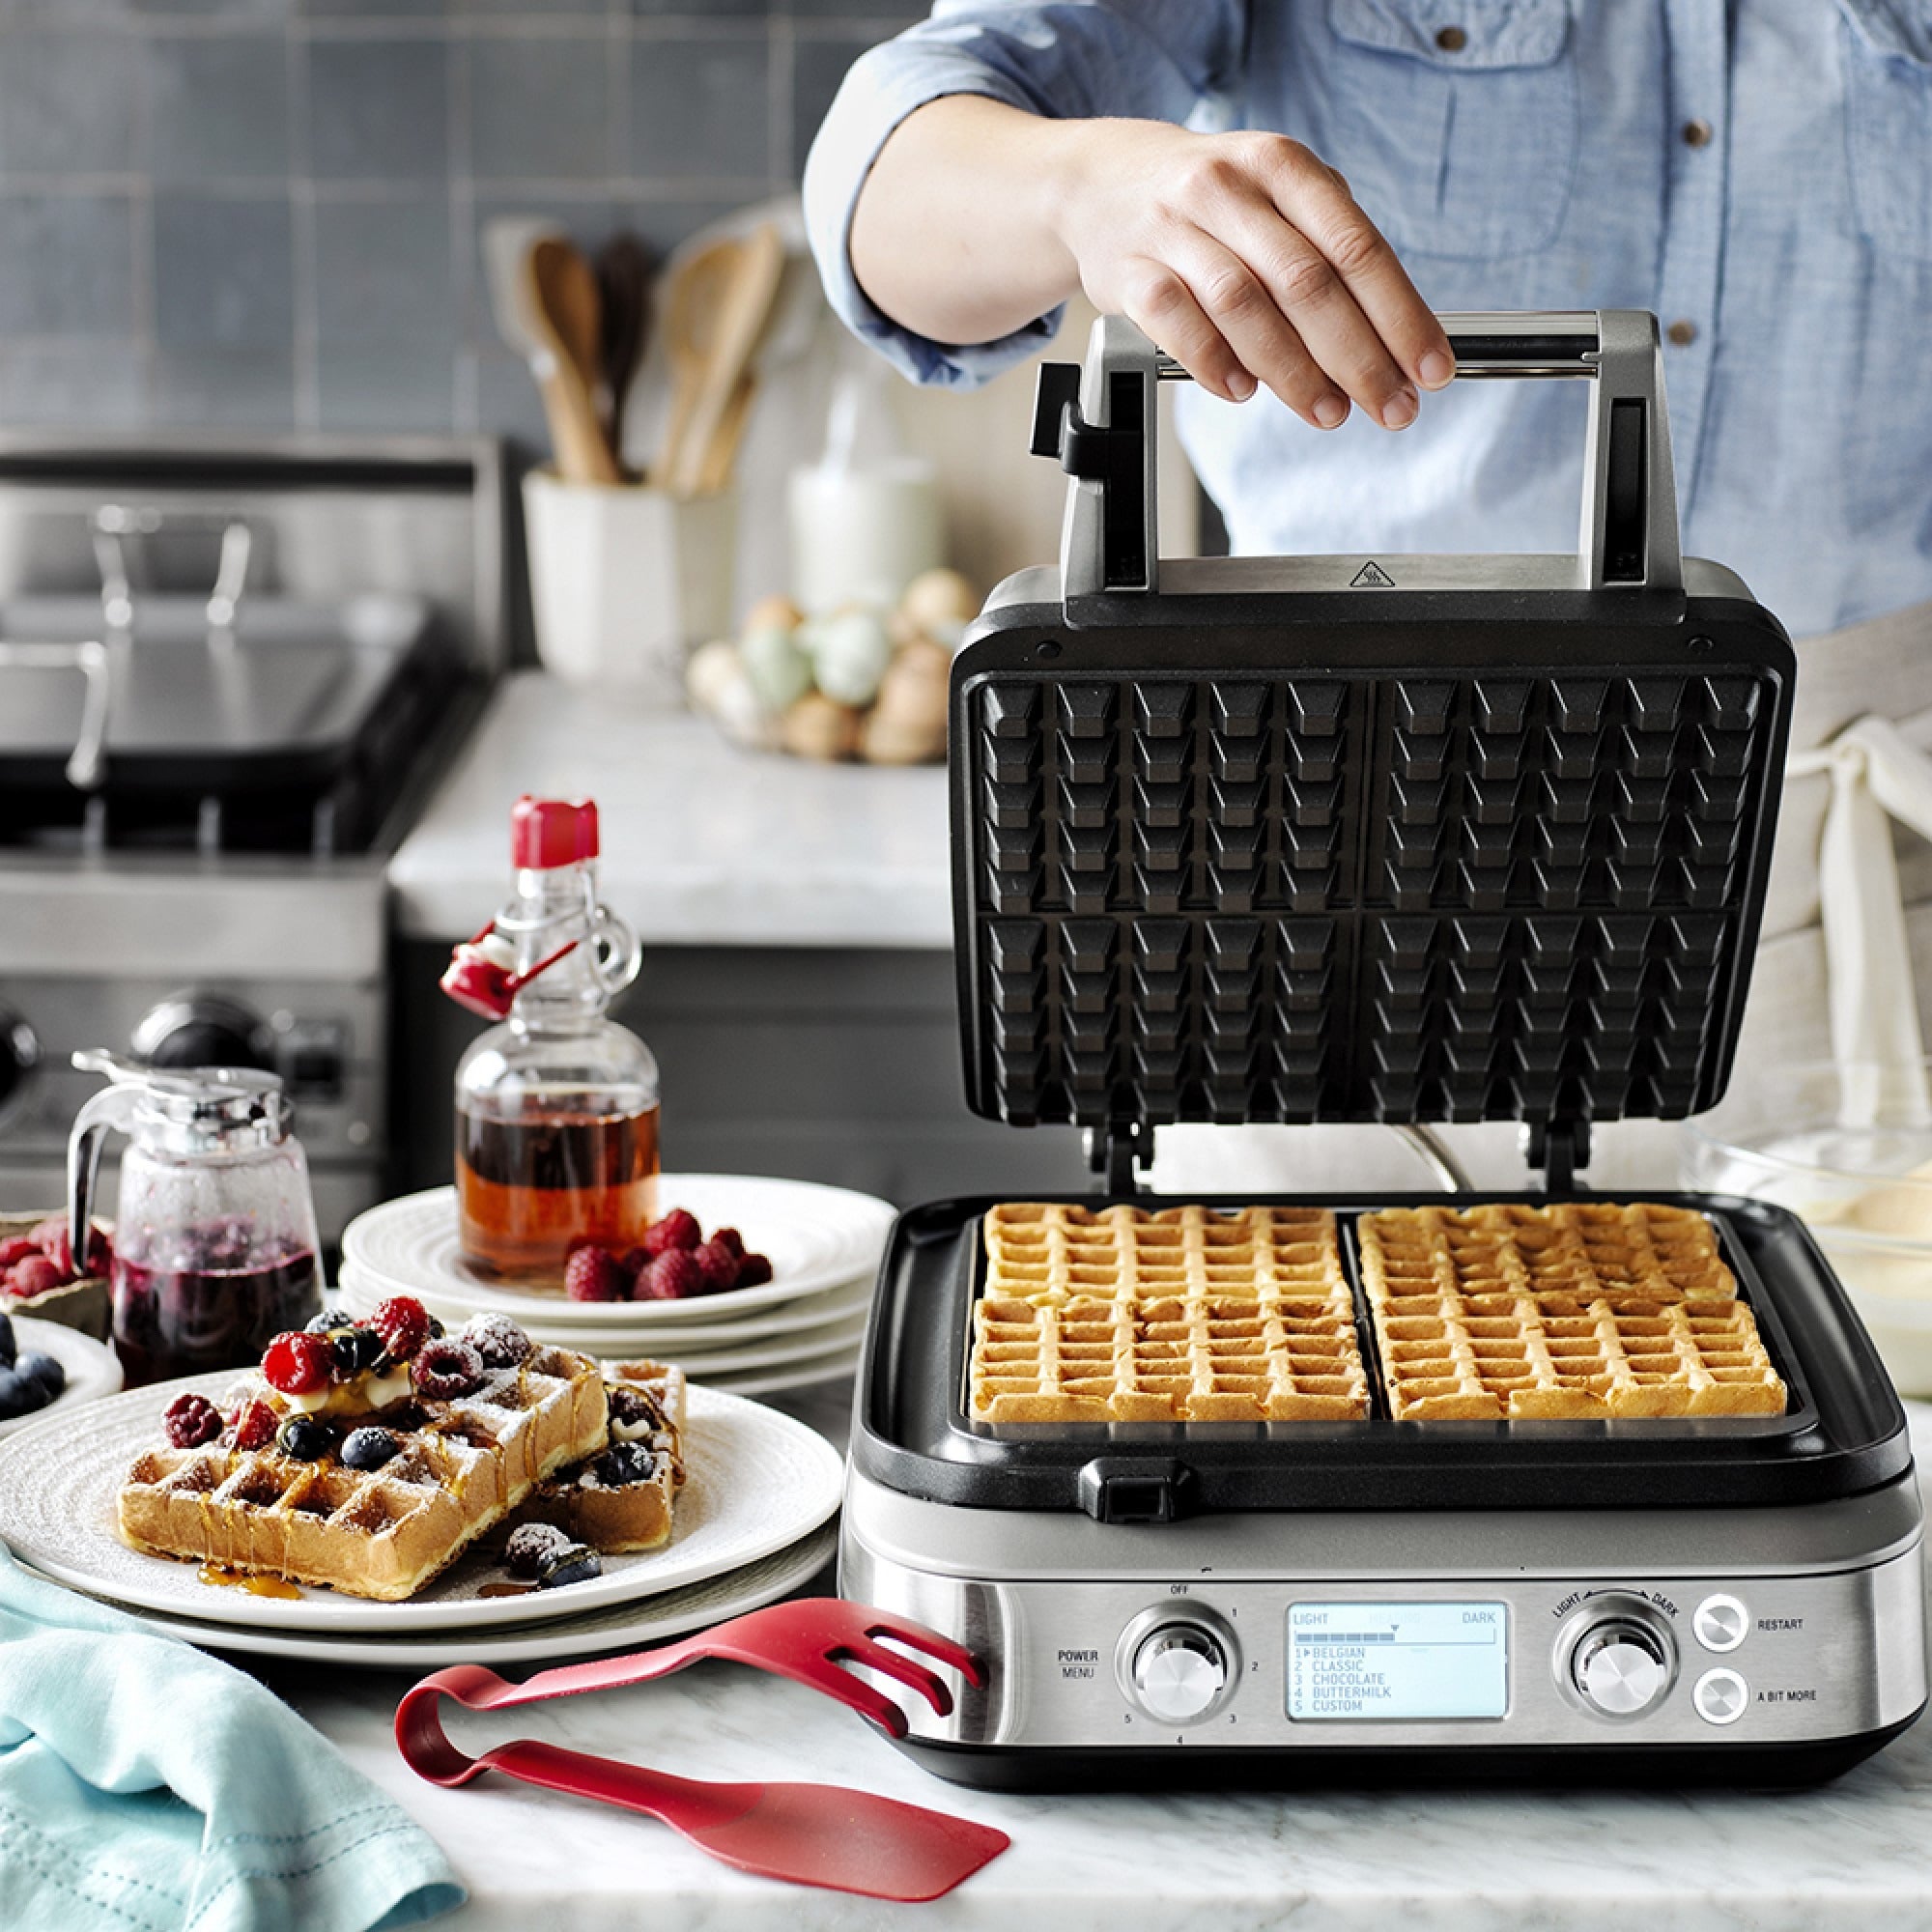 Waffles cooking in opened waffle maker placed on kitchen counter